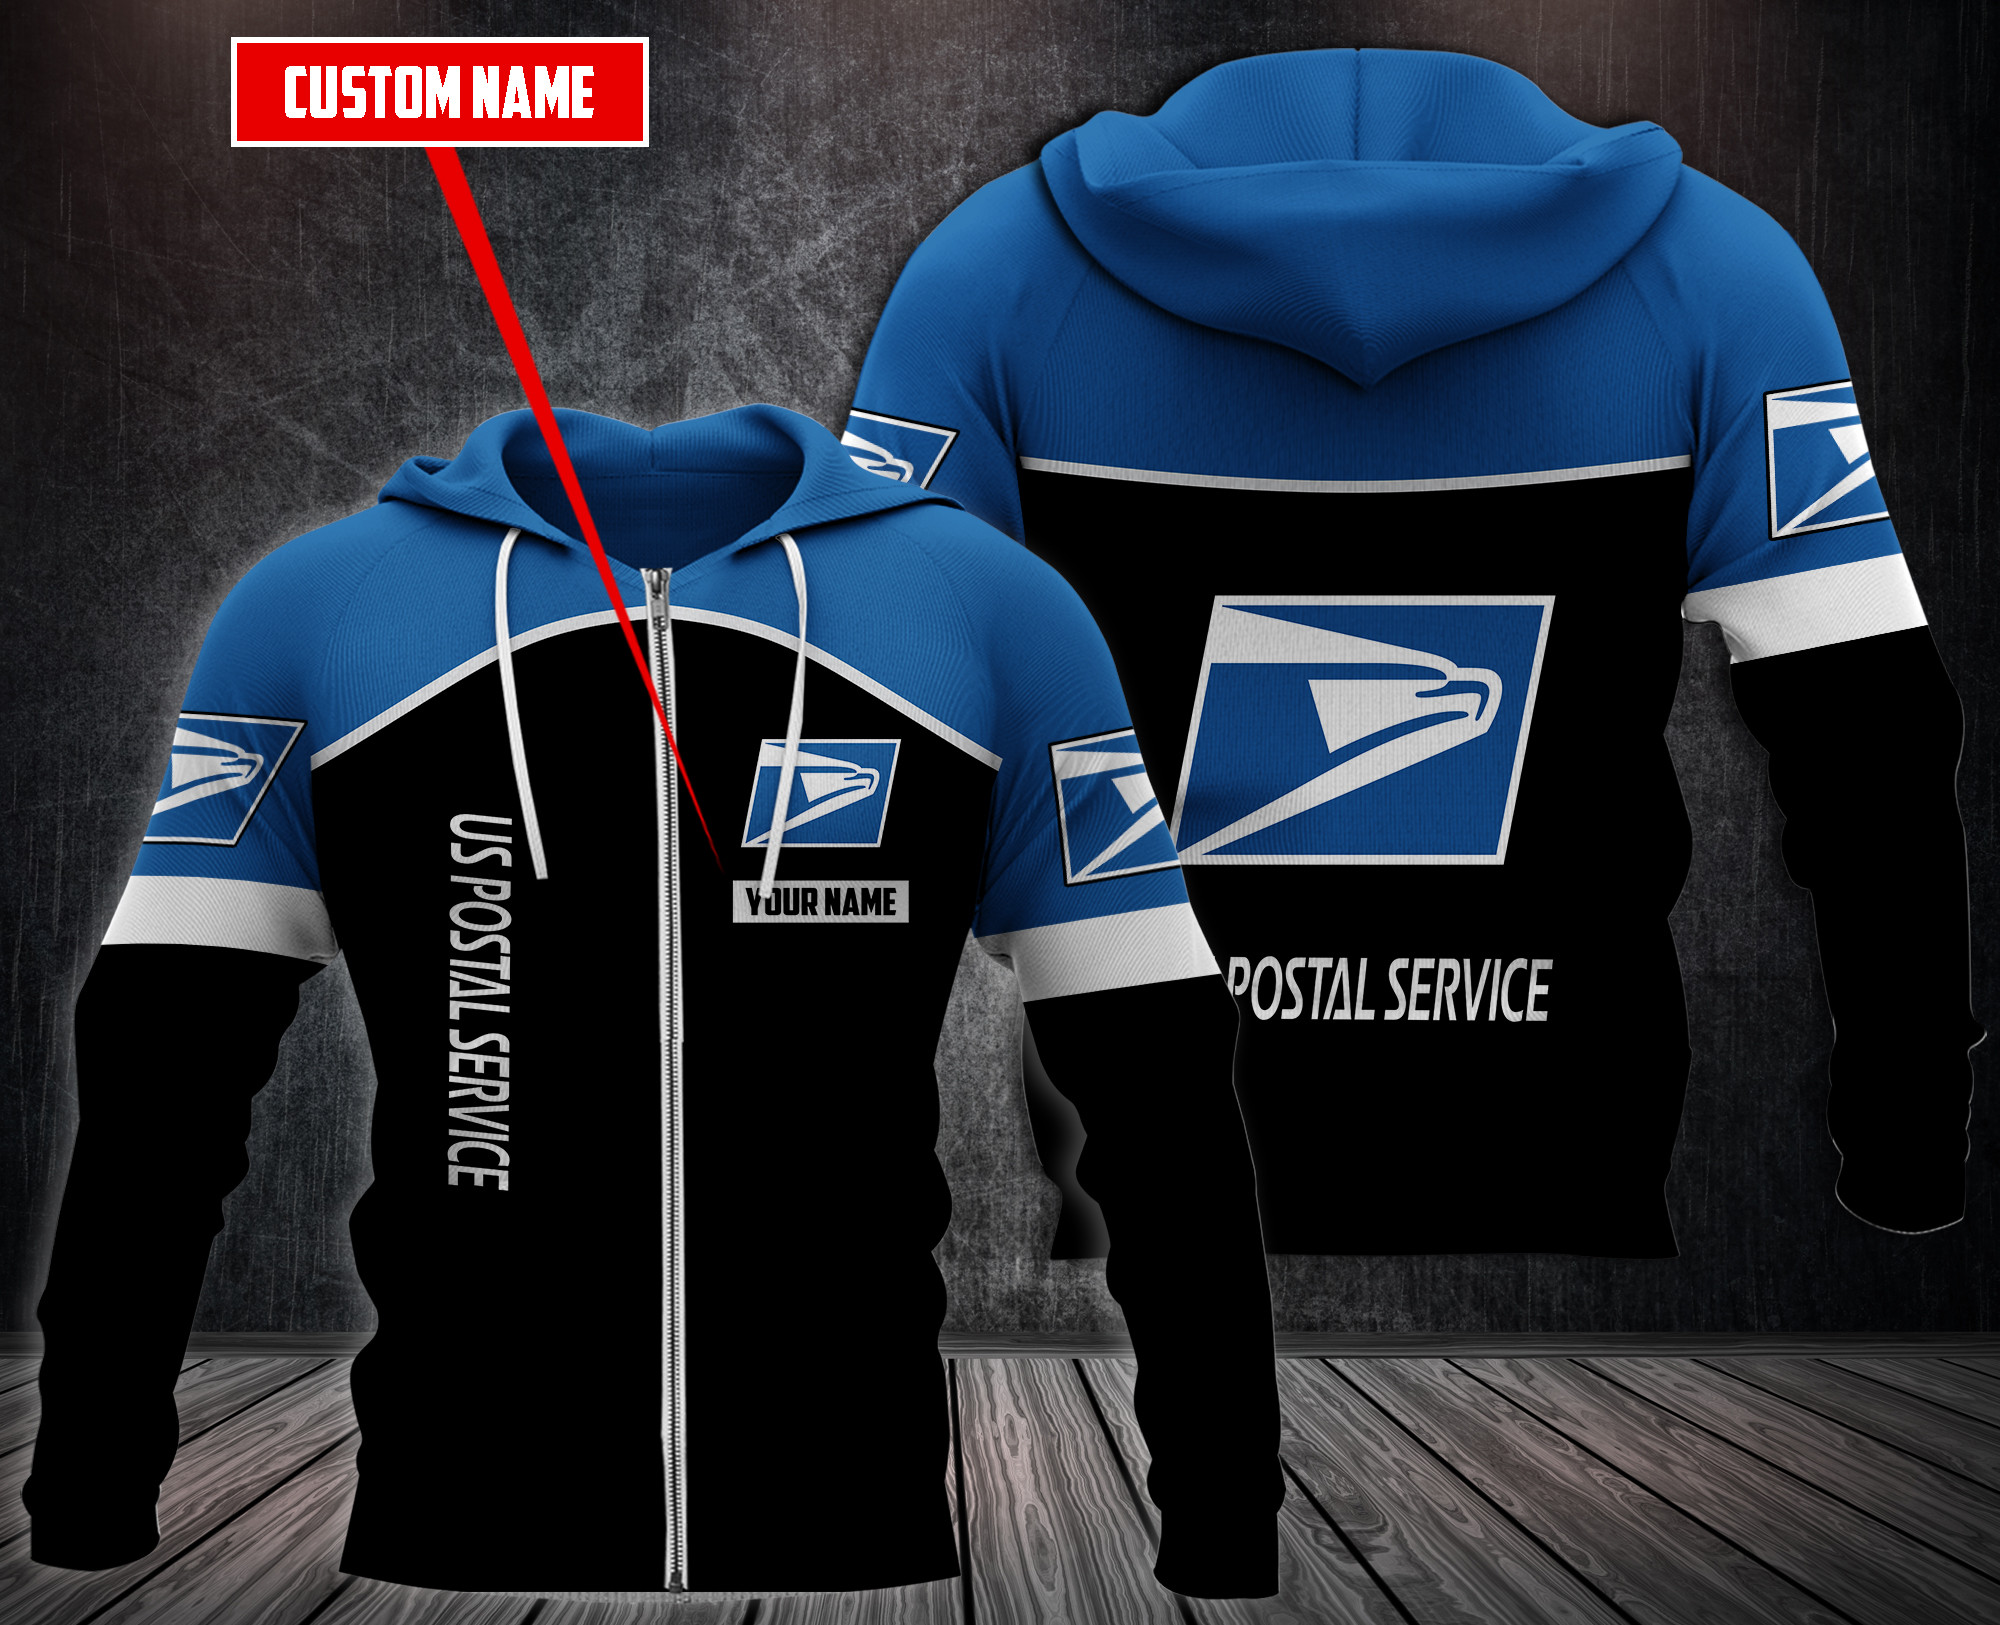 Choose the right hoodies for you on our boxboxshirt and ethershirt websites in 2022 96